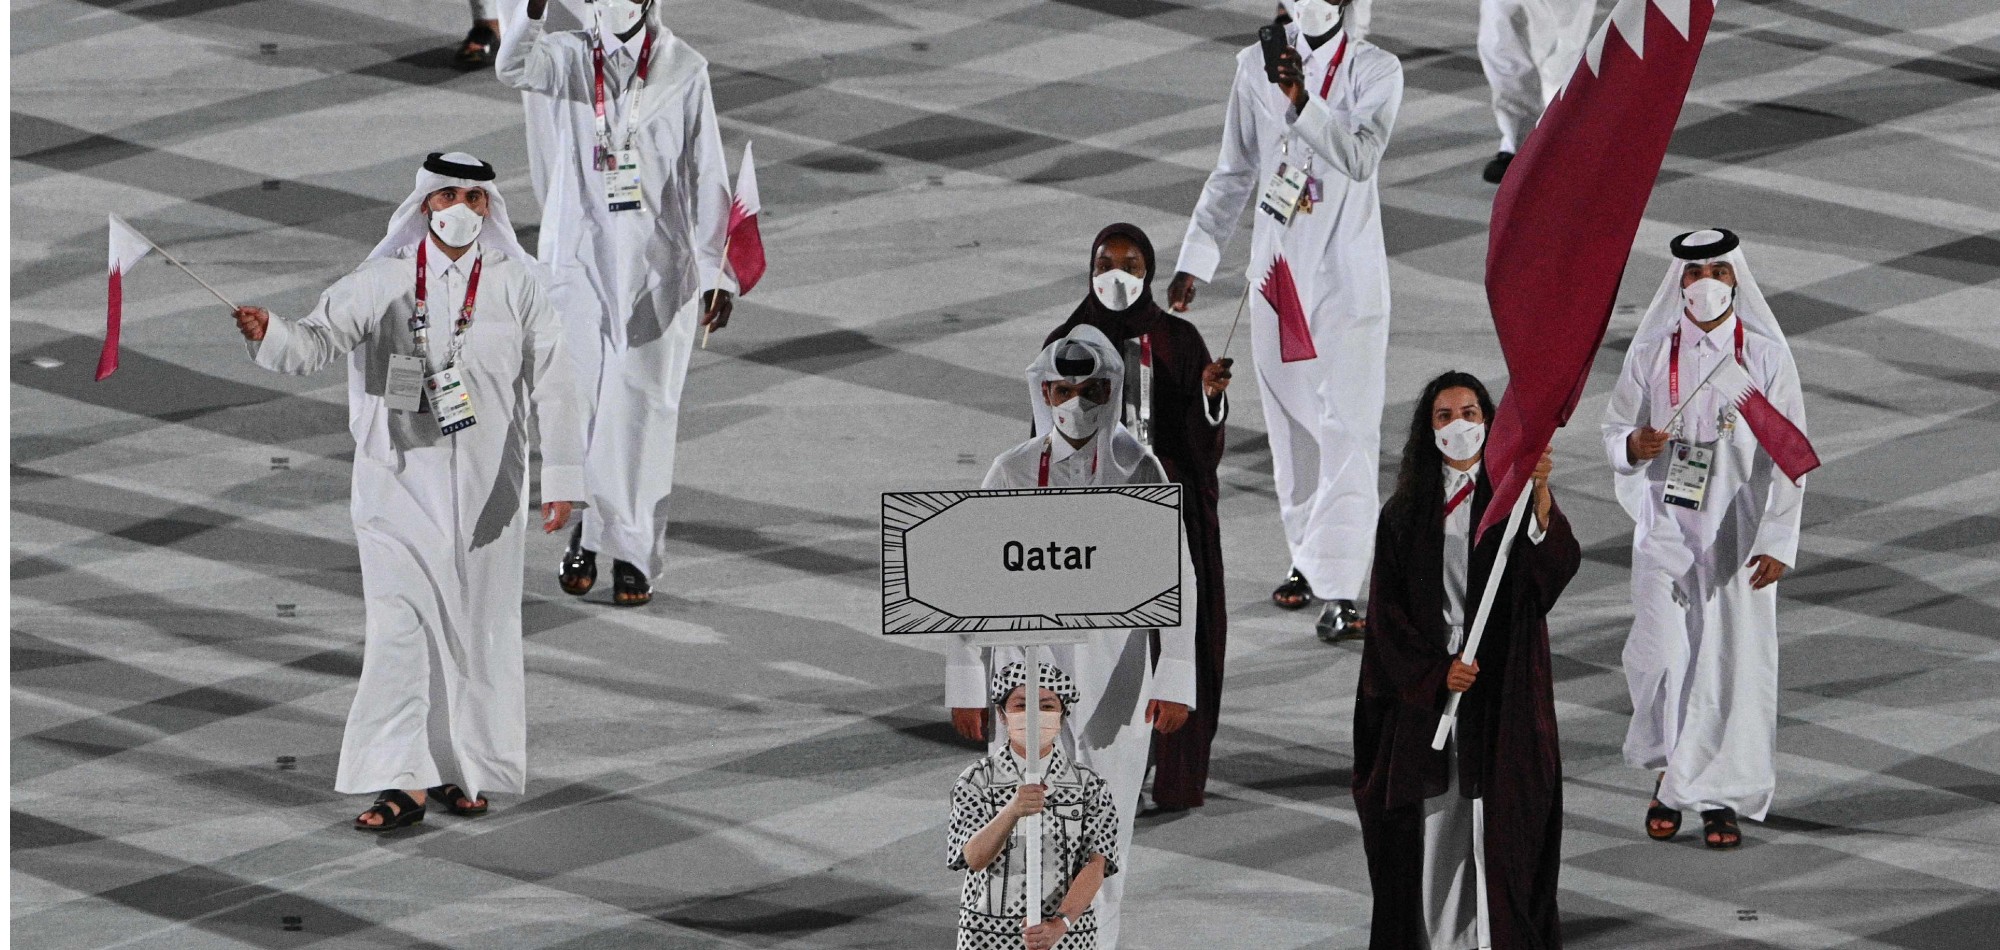 Tokyo Olympics 2020: Arabs Accomplish Highest Number of Medals in History... Qatar Tops Ranking